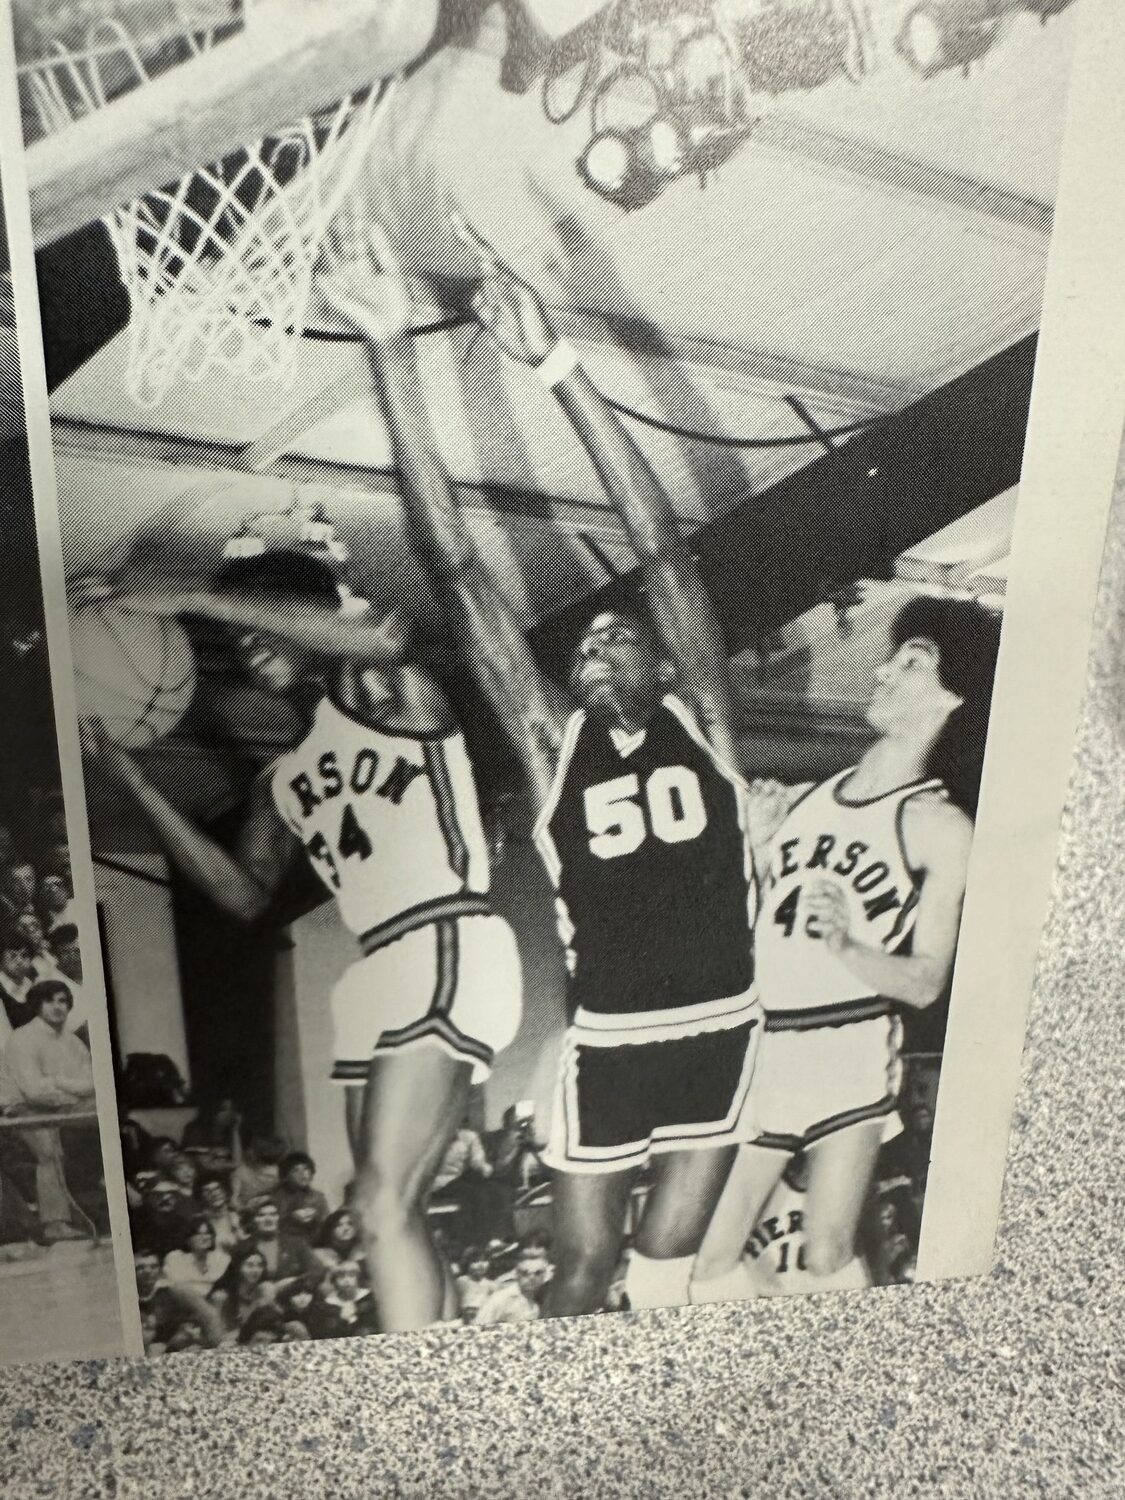 The 1978 team in action. PIERSON YEARBOOK PHOTOS